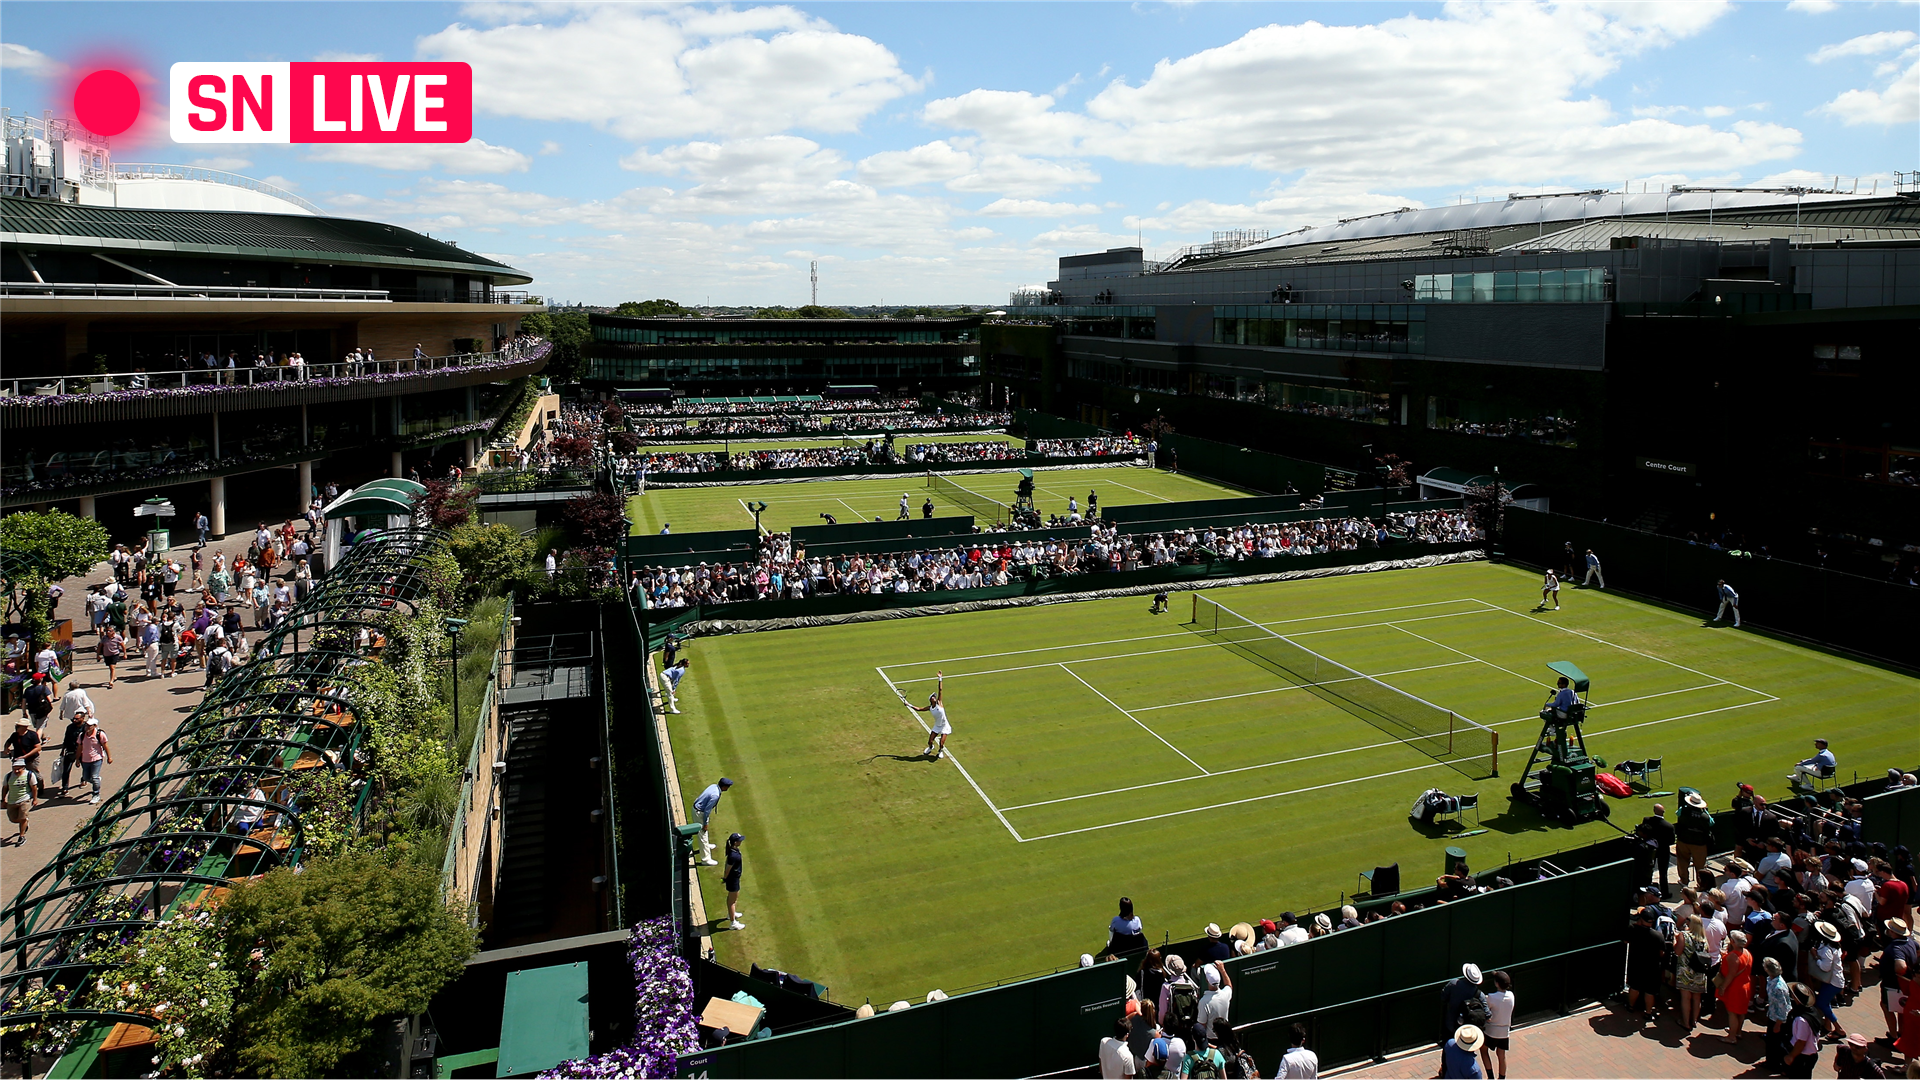 Wimbledon 2019 results: Live tennis scores, full draw, bracket at All England Club ...